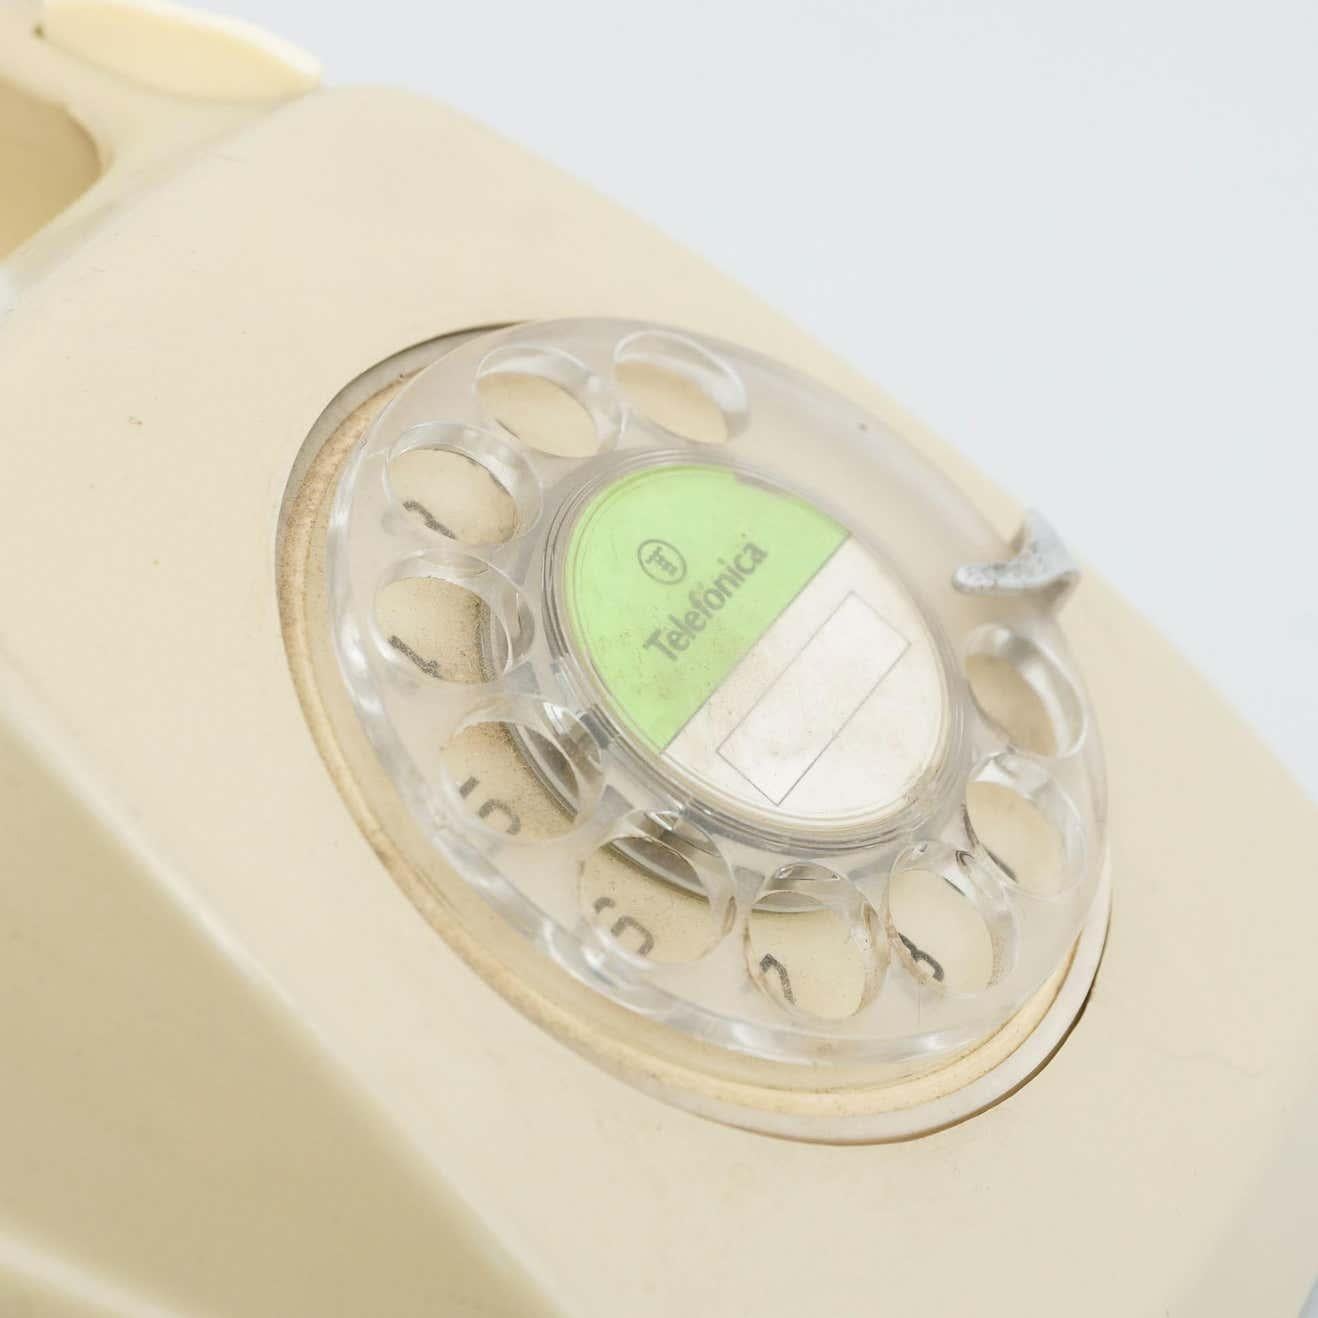 Vintage Spanish Analog Telephone by Telefonica, circa 1980 For Sale 4